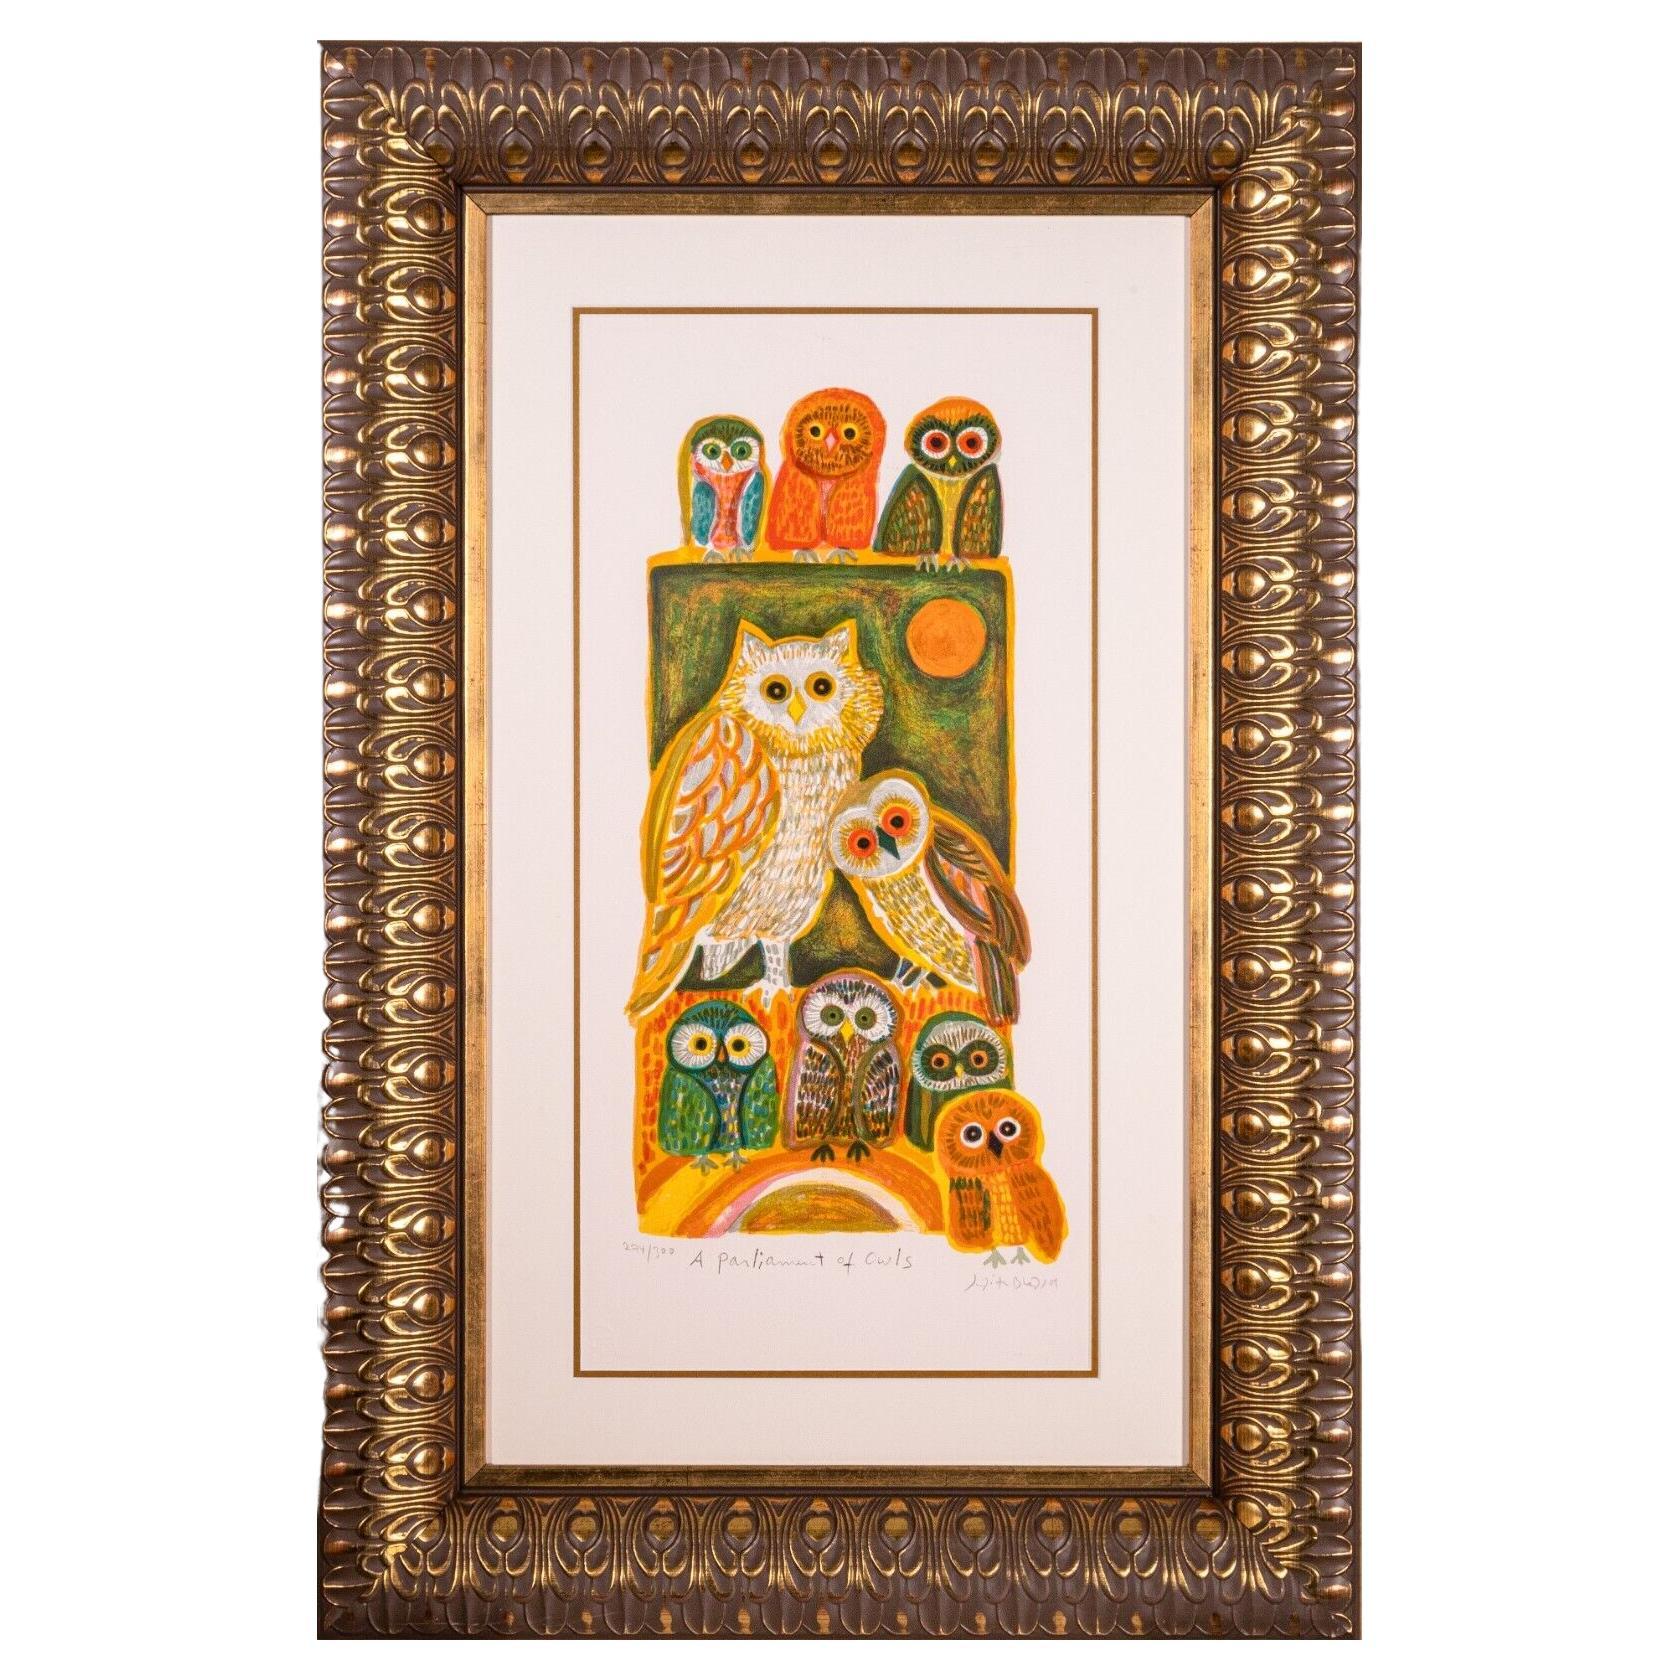 Judith Bledsoe A Parliament of Owls Signed Modern Lithograph 274/300 Framed For Sale